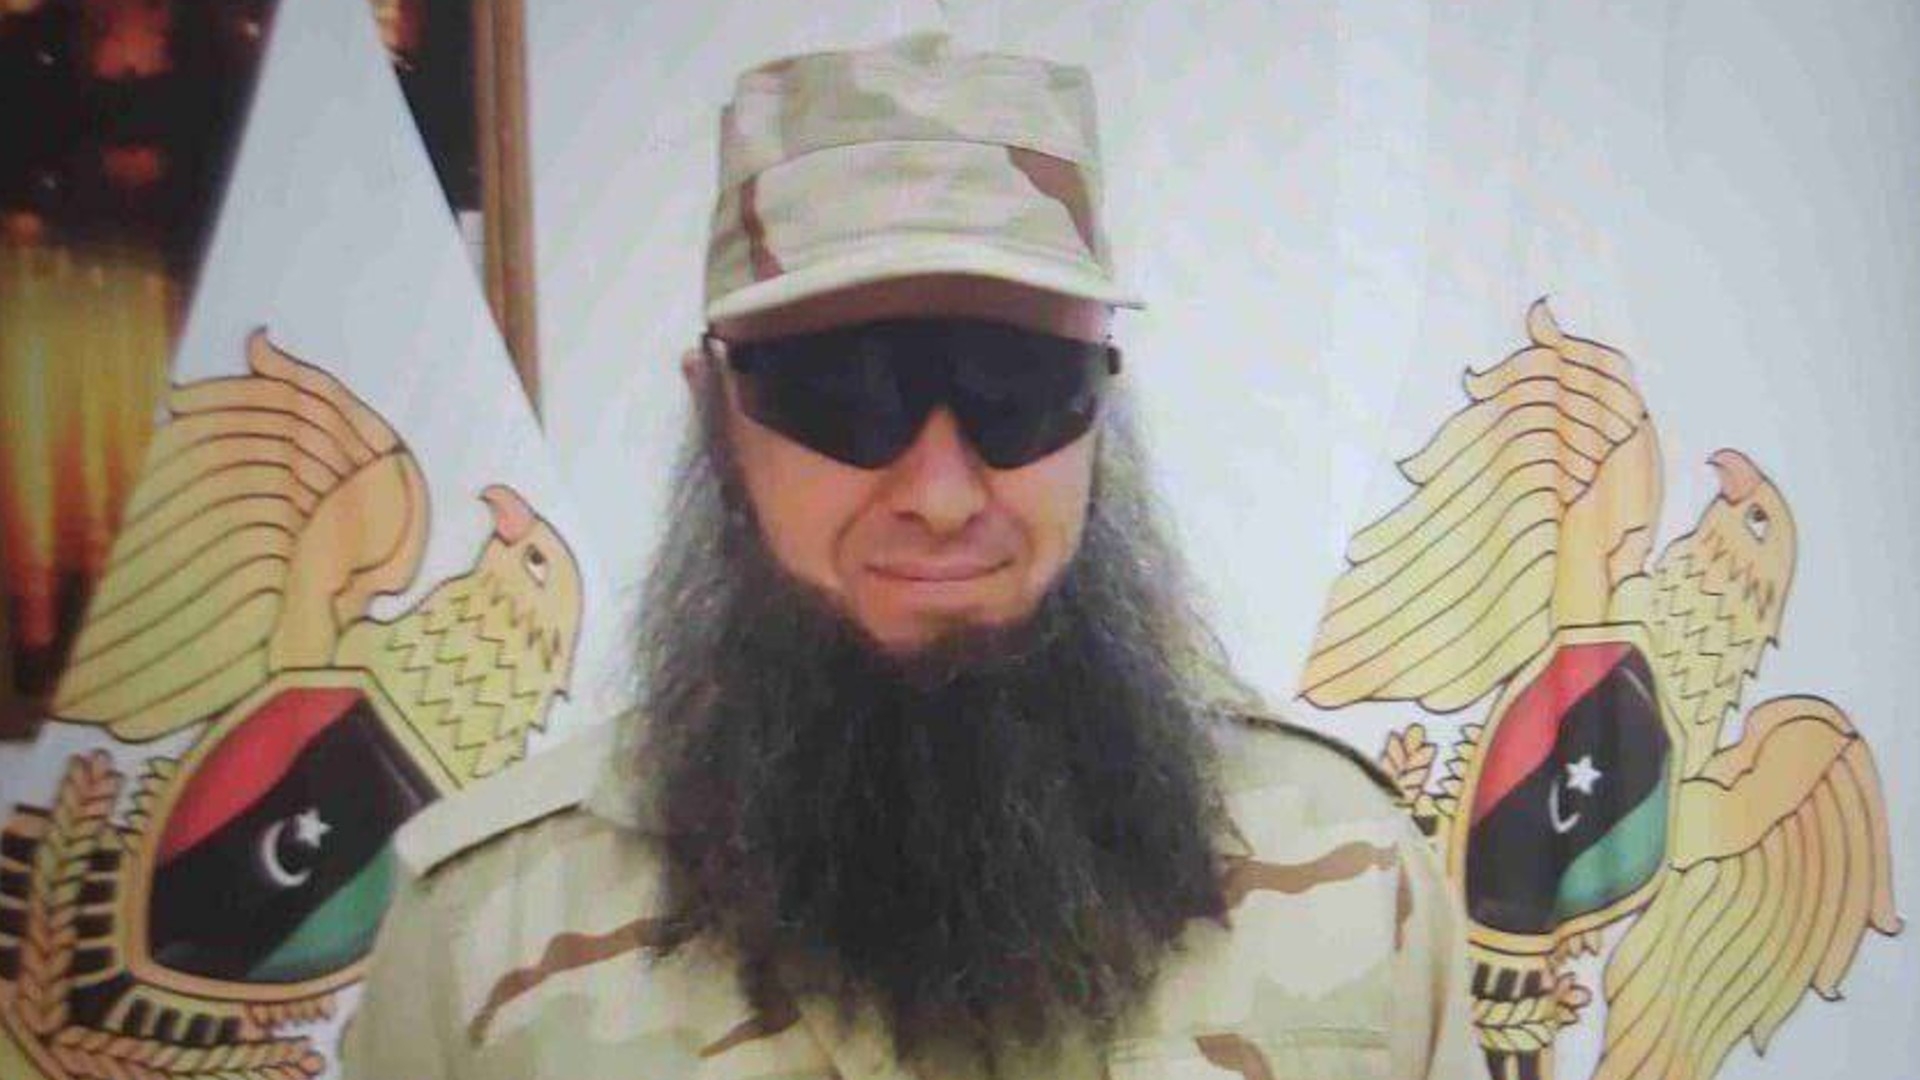 A leaked image purportedly showing Wagner leader Yevgeny Prigozhin disguised as a Libyan military commander (Screengrab)